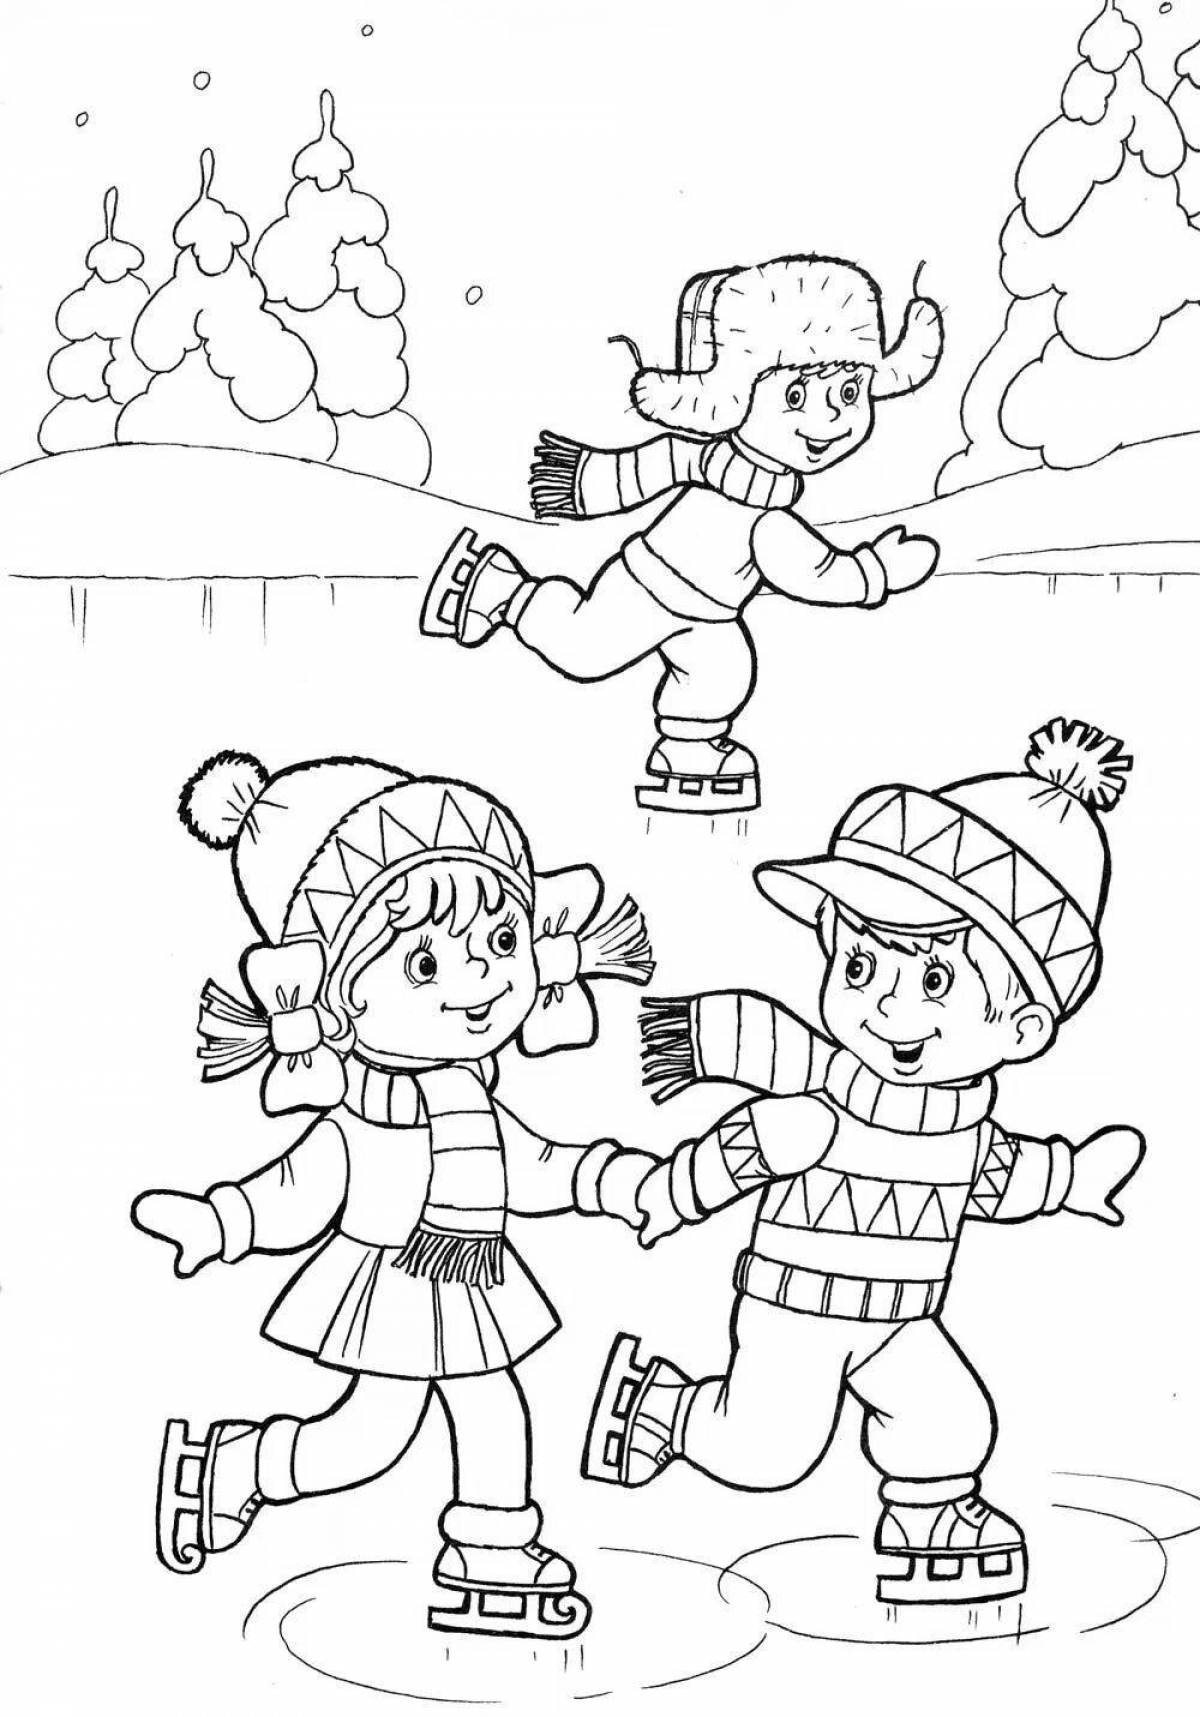 Funny winter coloring book